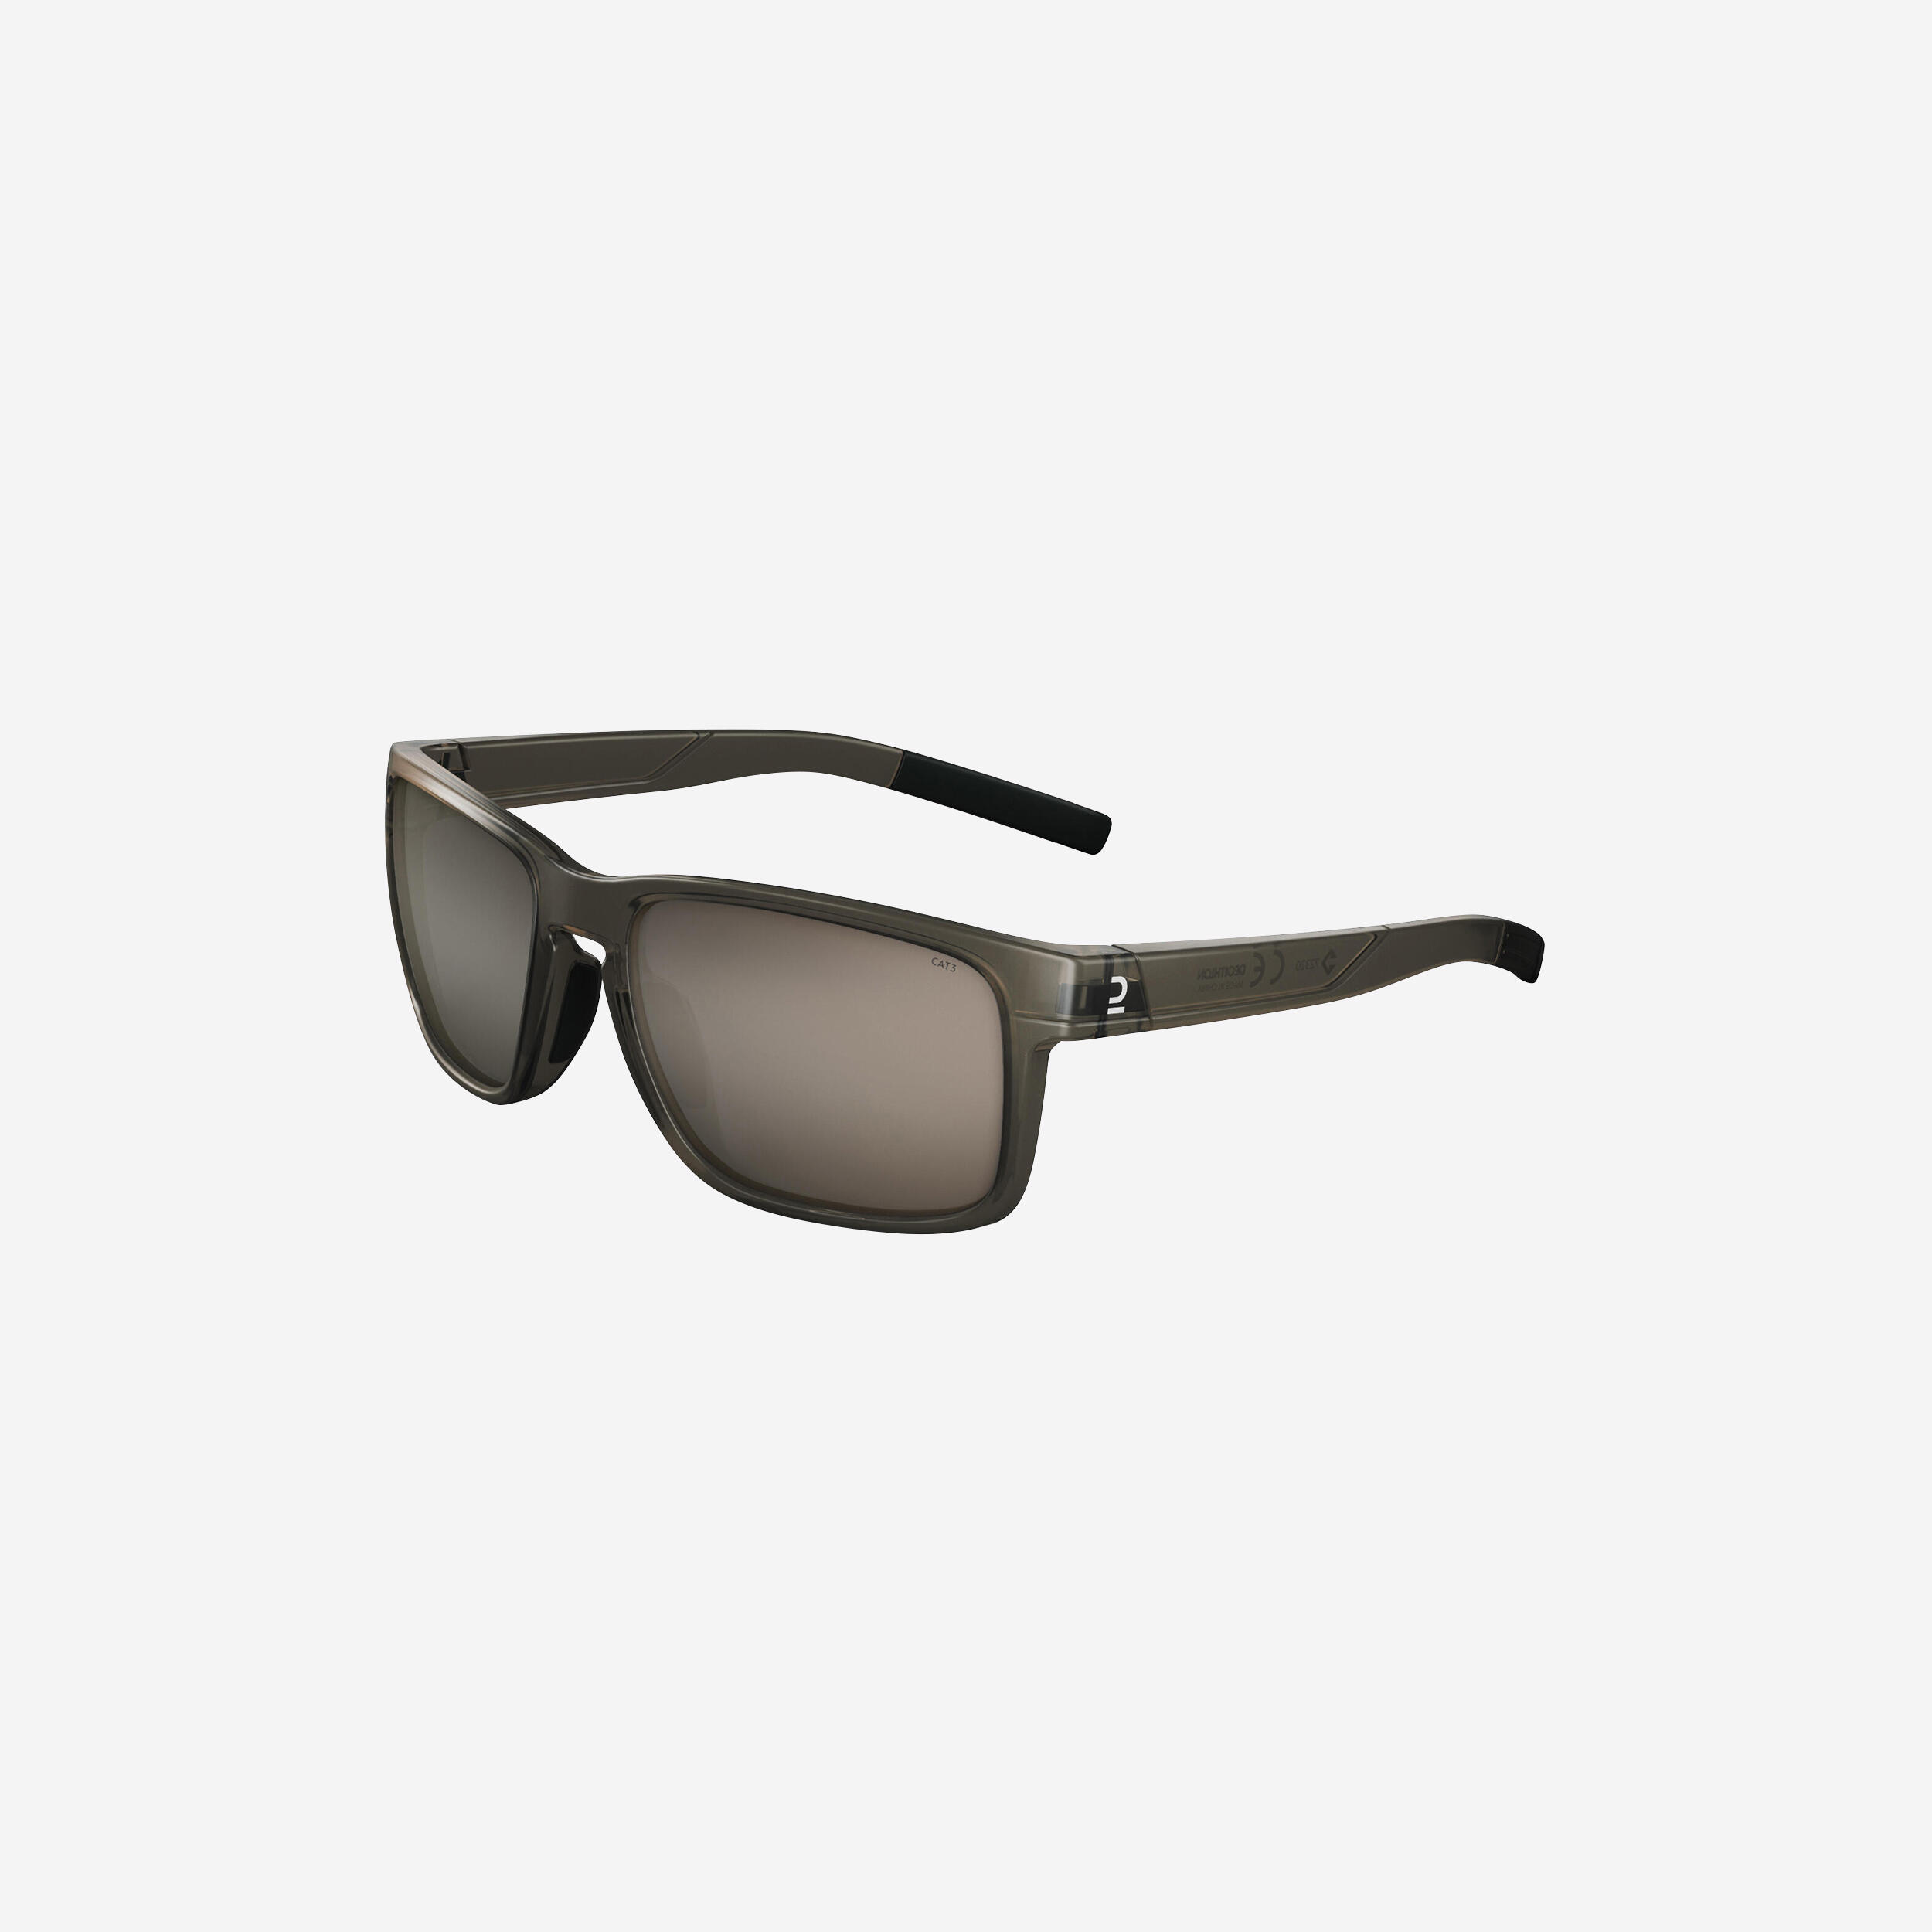 Adult hiking sunglasses – MH530 – Category 3 1/9